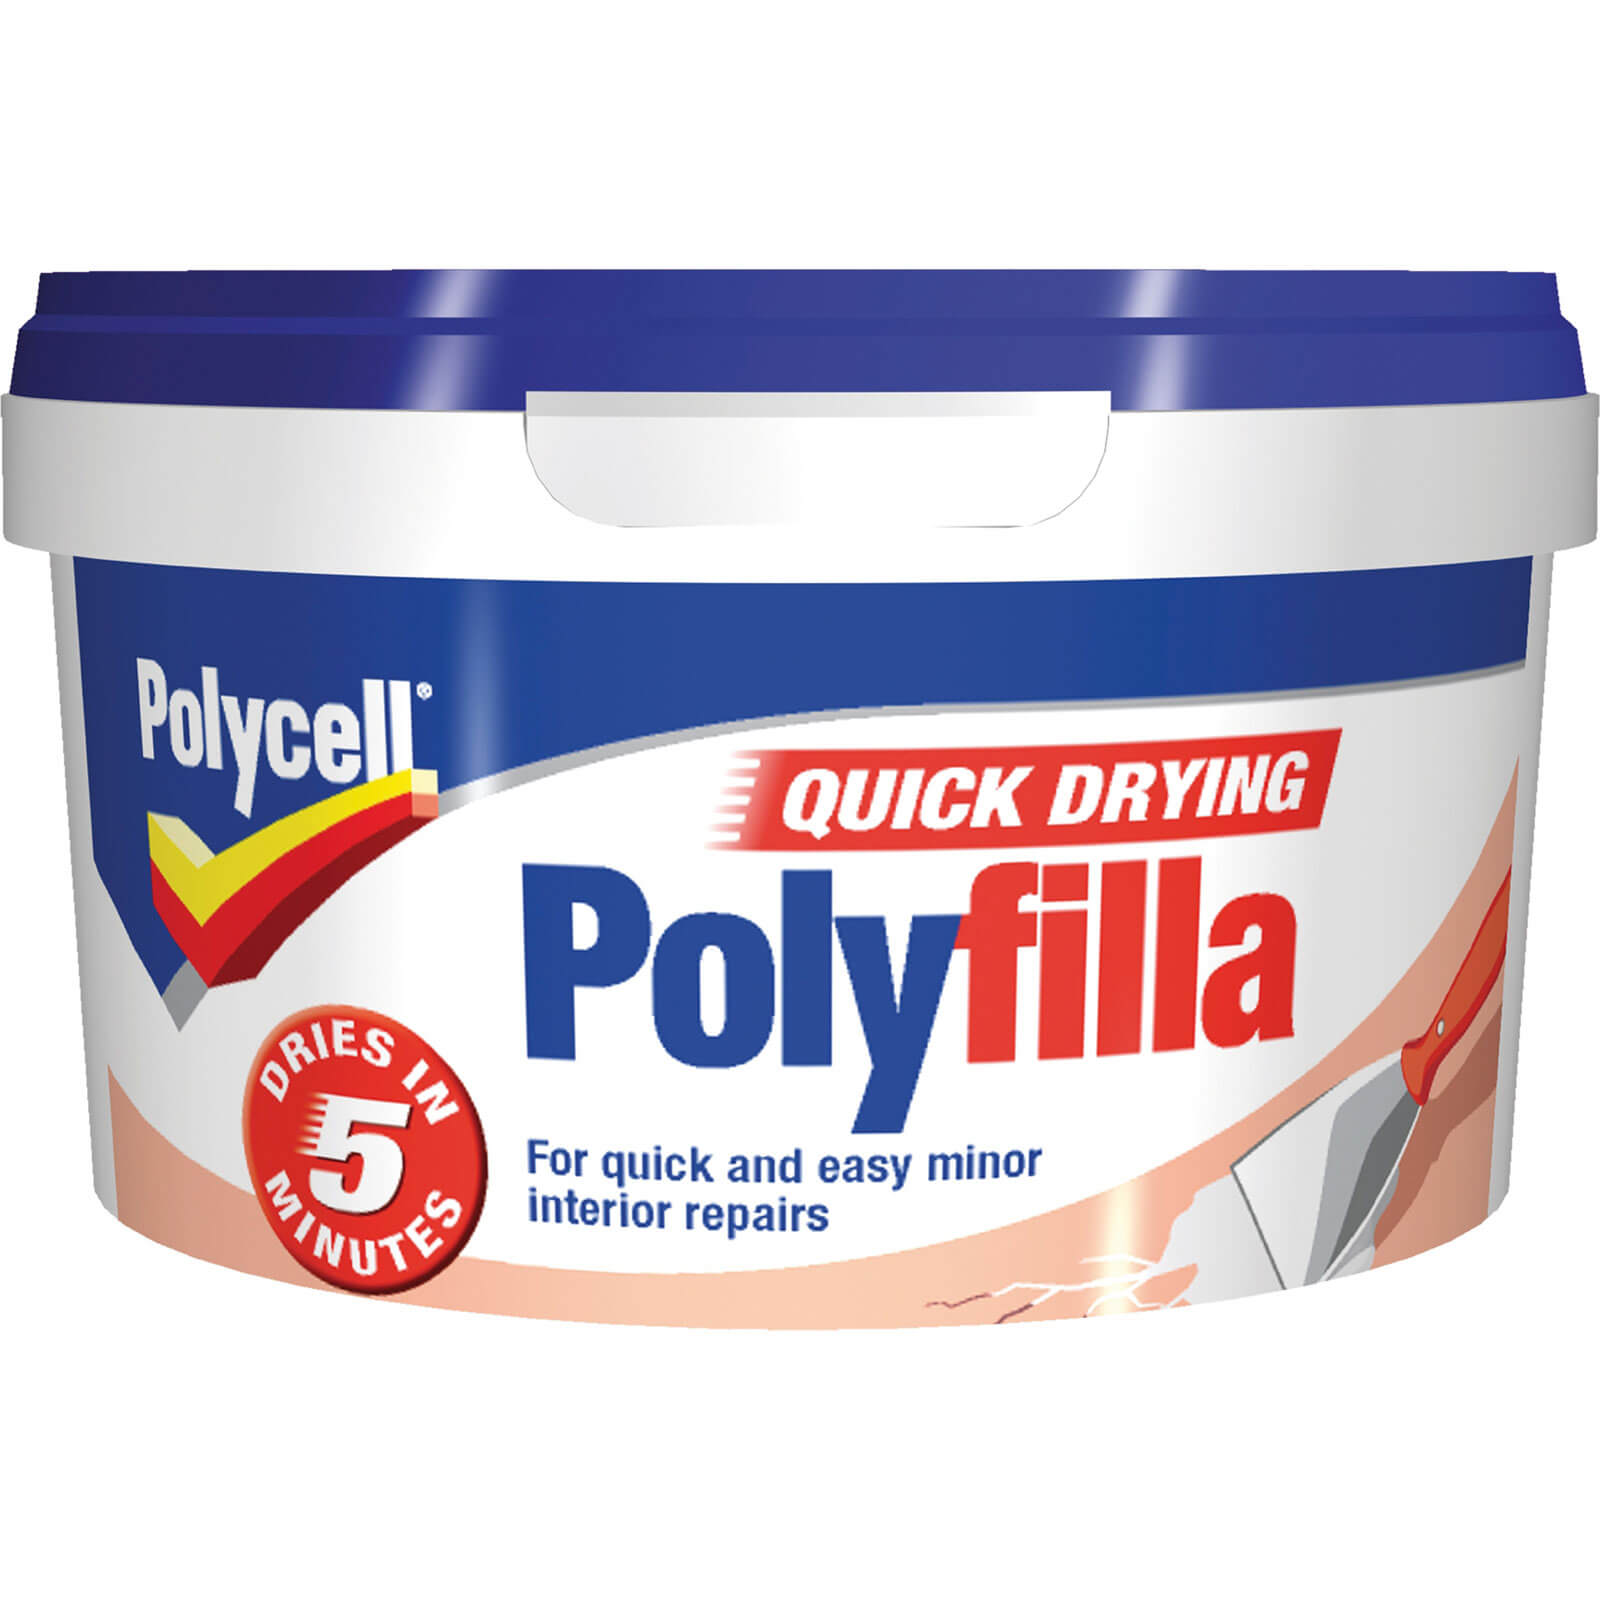 Image of Polycell Multi Purpose Quick Drying Polyfilla Tub 500g